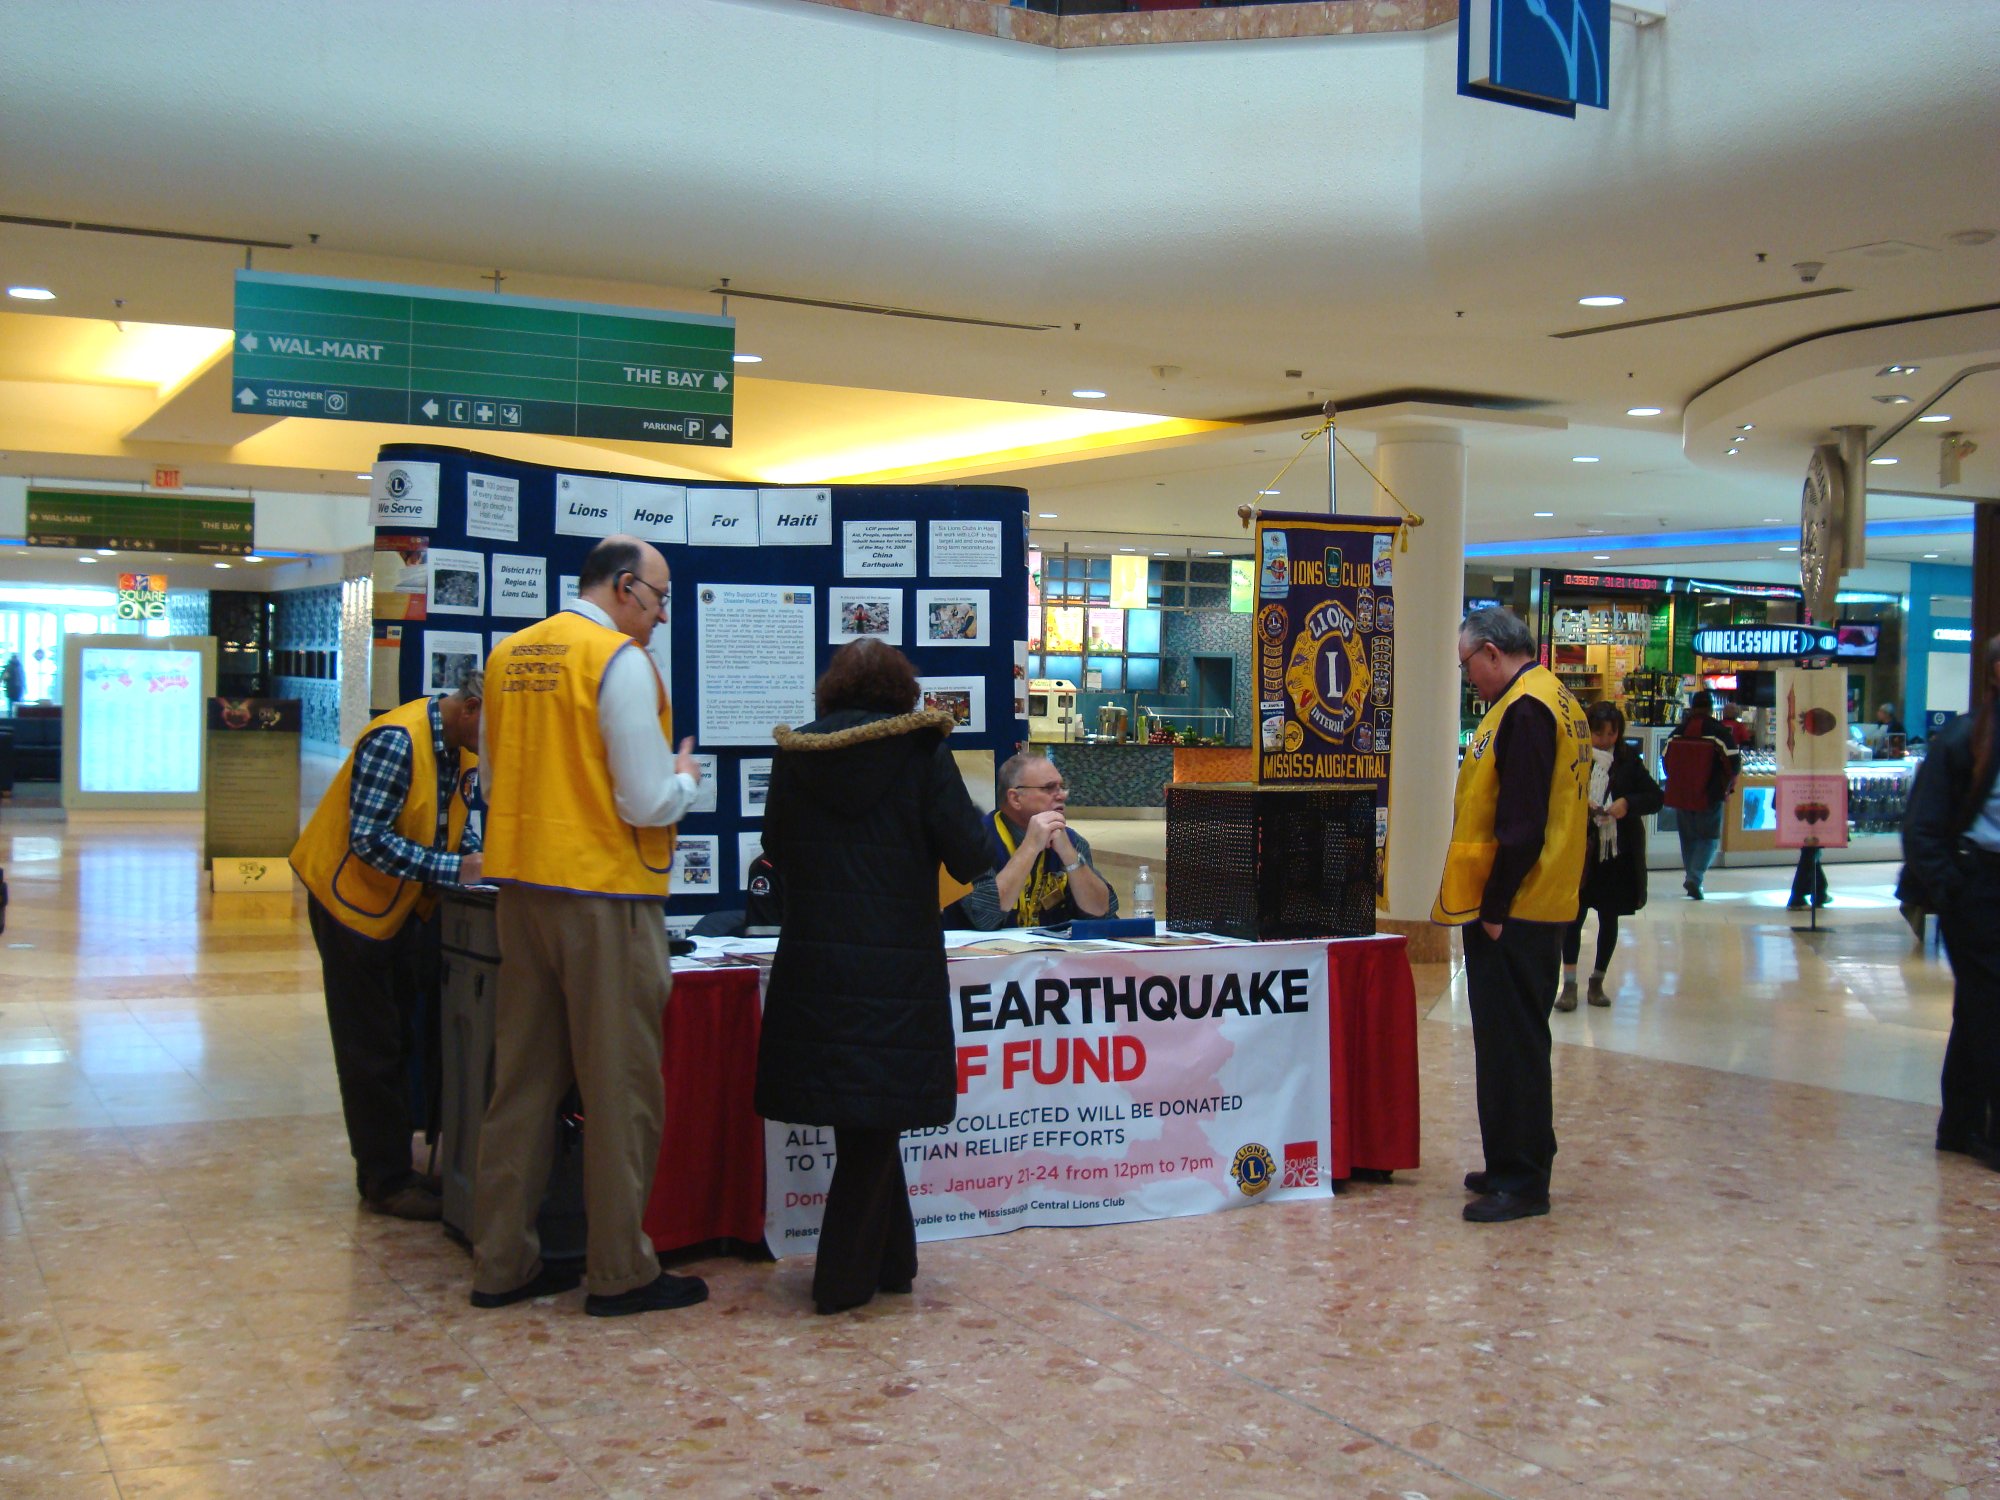 Lions Haiti Relief1 - 22Jan2010.jpg Square One Shopping Centre Lower Level Booth